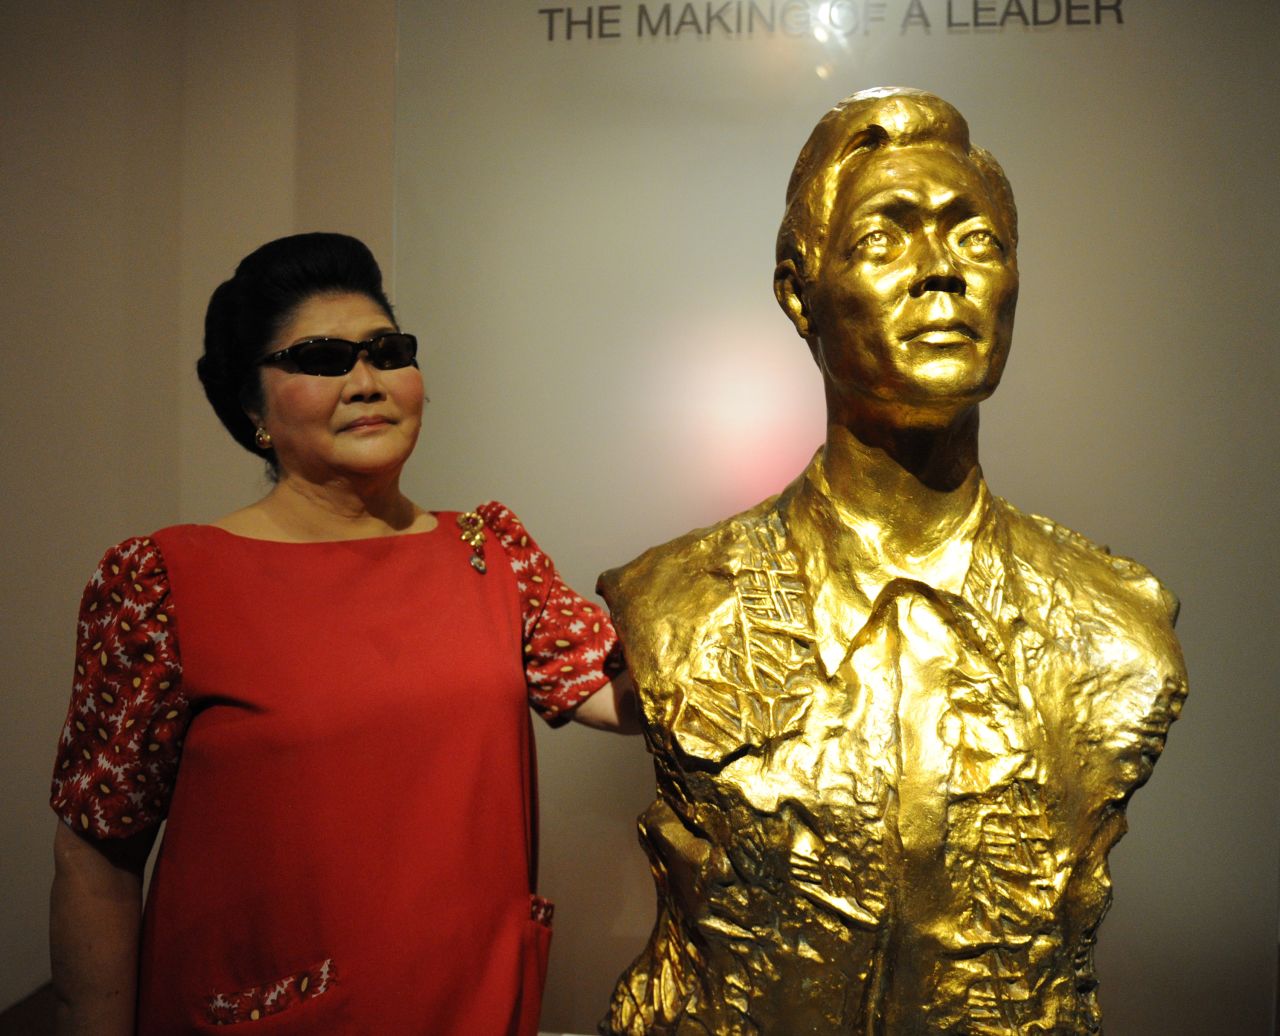 Former first lady Imelda Marcos stands next to a bust of her late husband and Philippine president, Ferdinand Marcos.